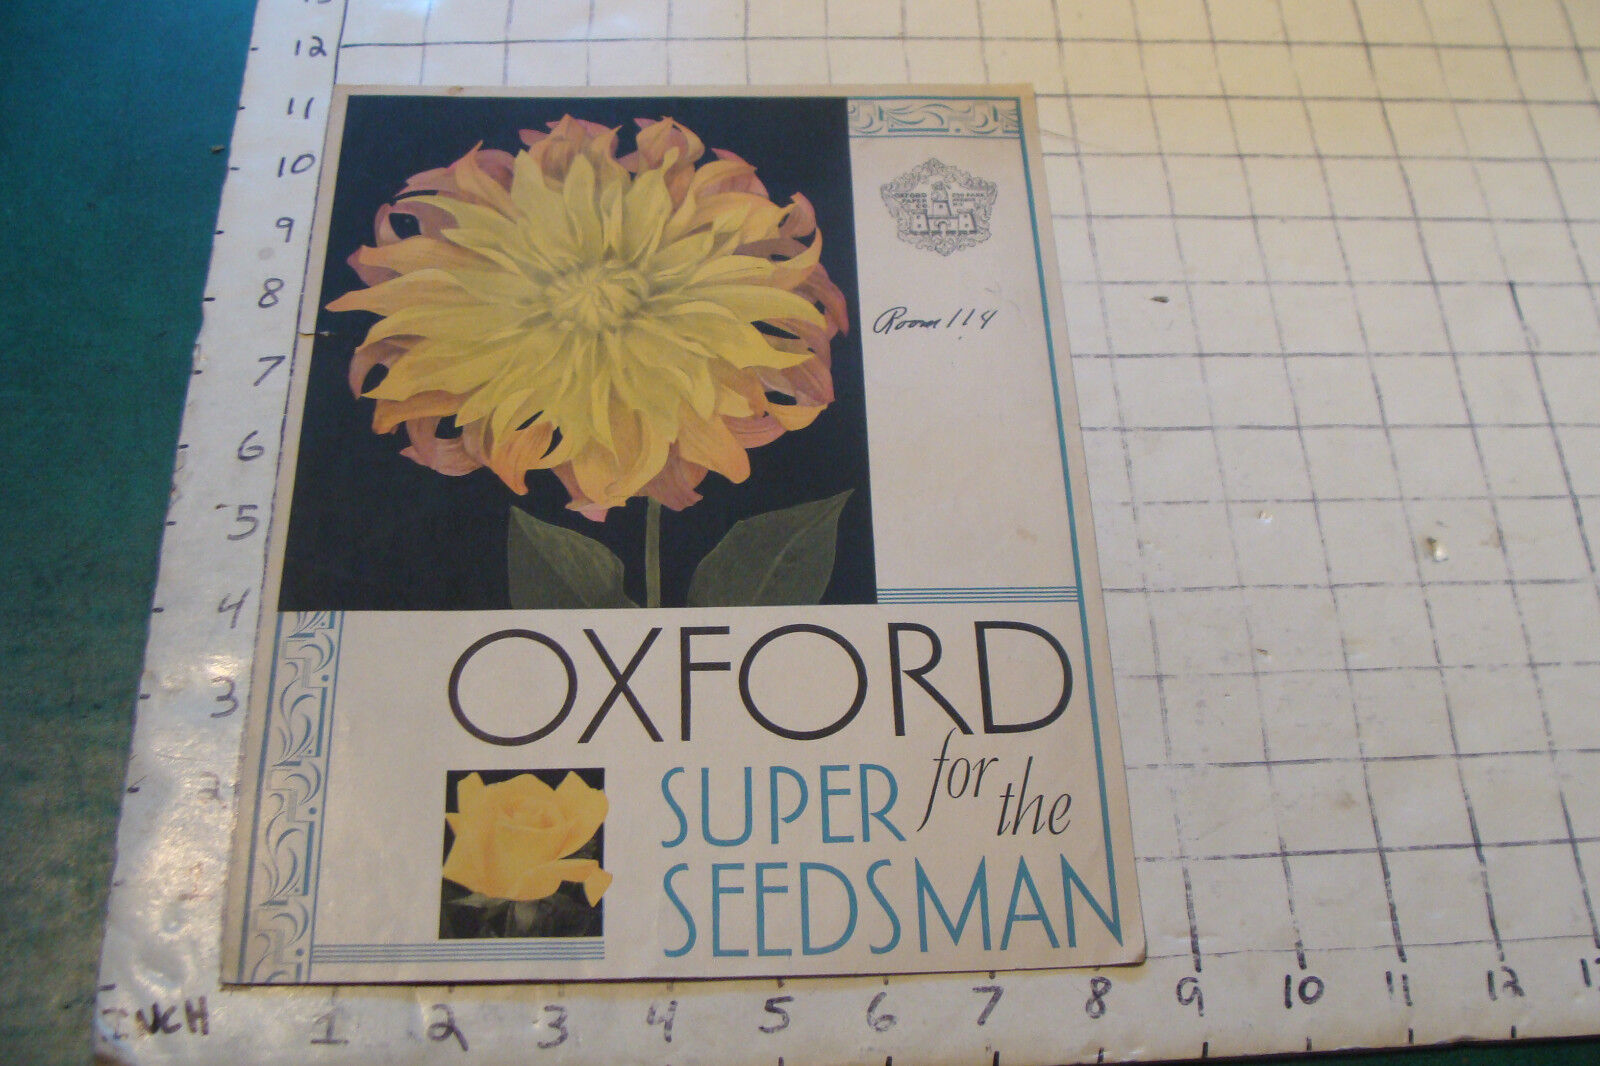 Oxford for the Super Seedsman, early but undated, big folding brochure